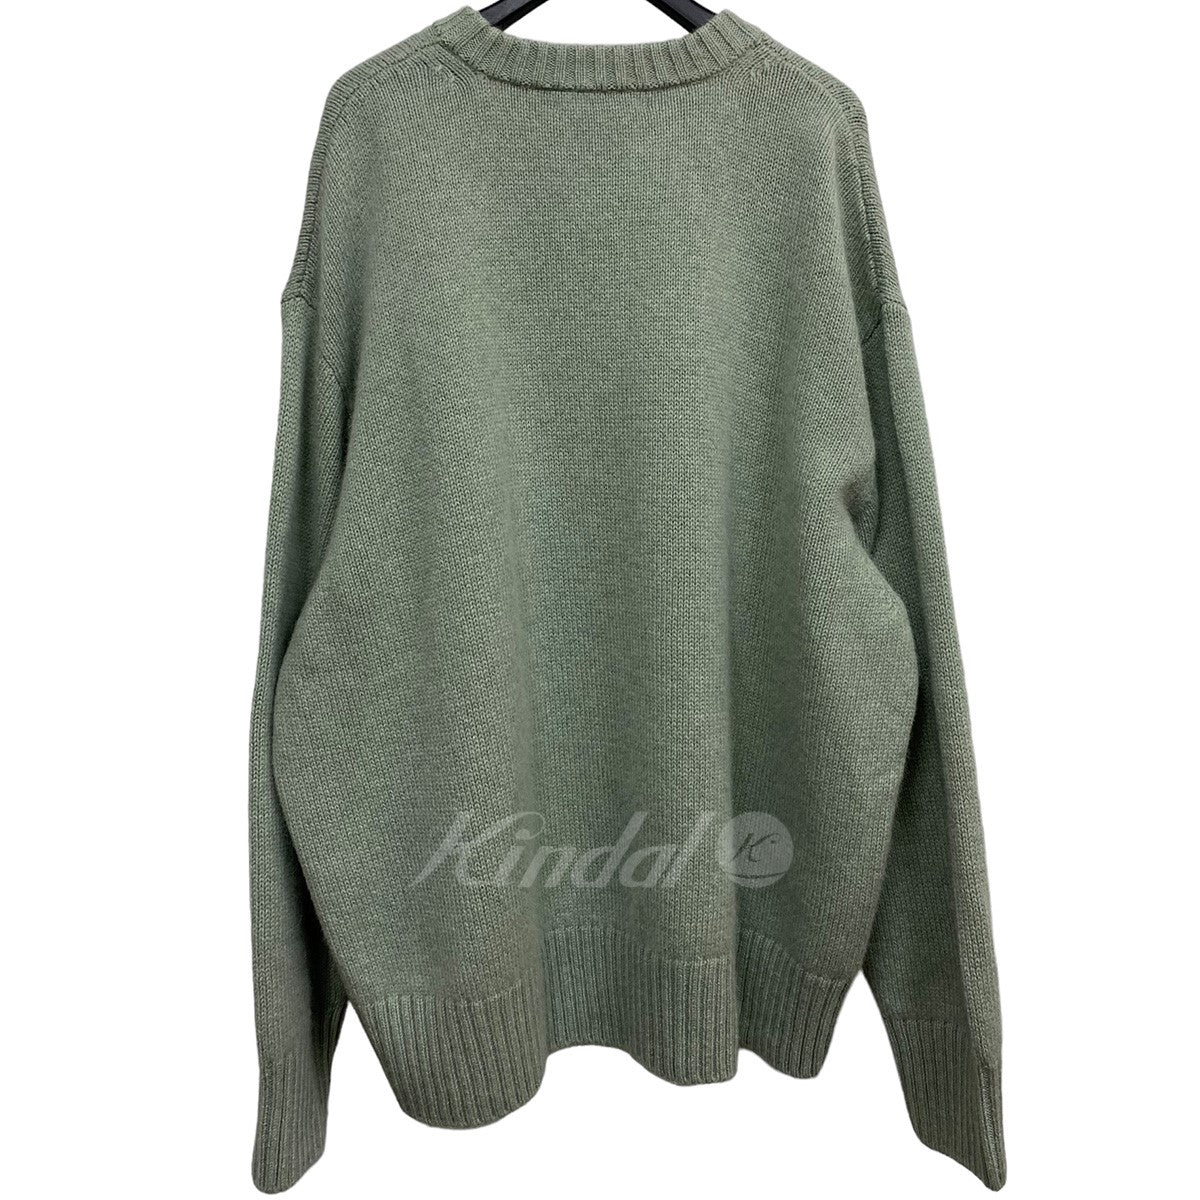 Alfred Hitchcock×UNDER COVER(Alfred Hitchcock×アンダーカバー アルフレッド ヒッチコック) 22AW  Hitchcock Face Crewneck Knitヒッチコック刺繍ニットセーター